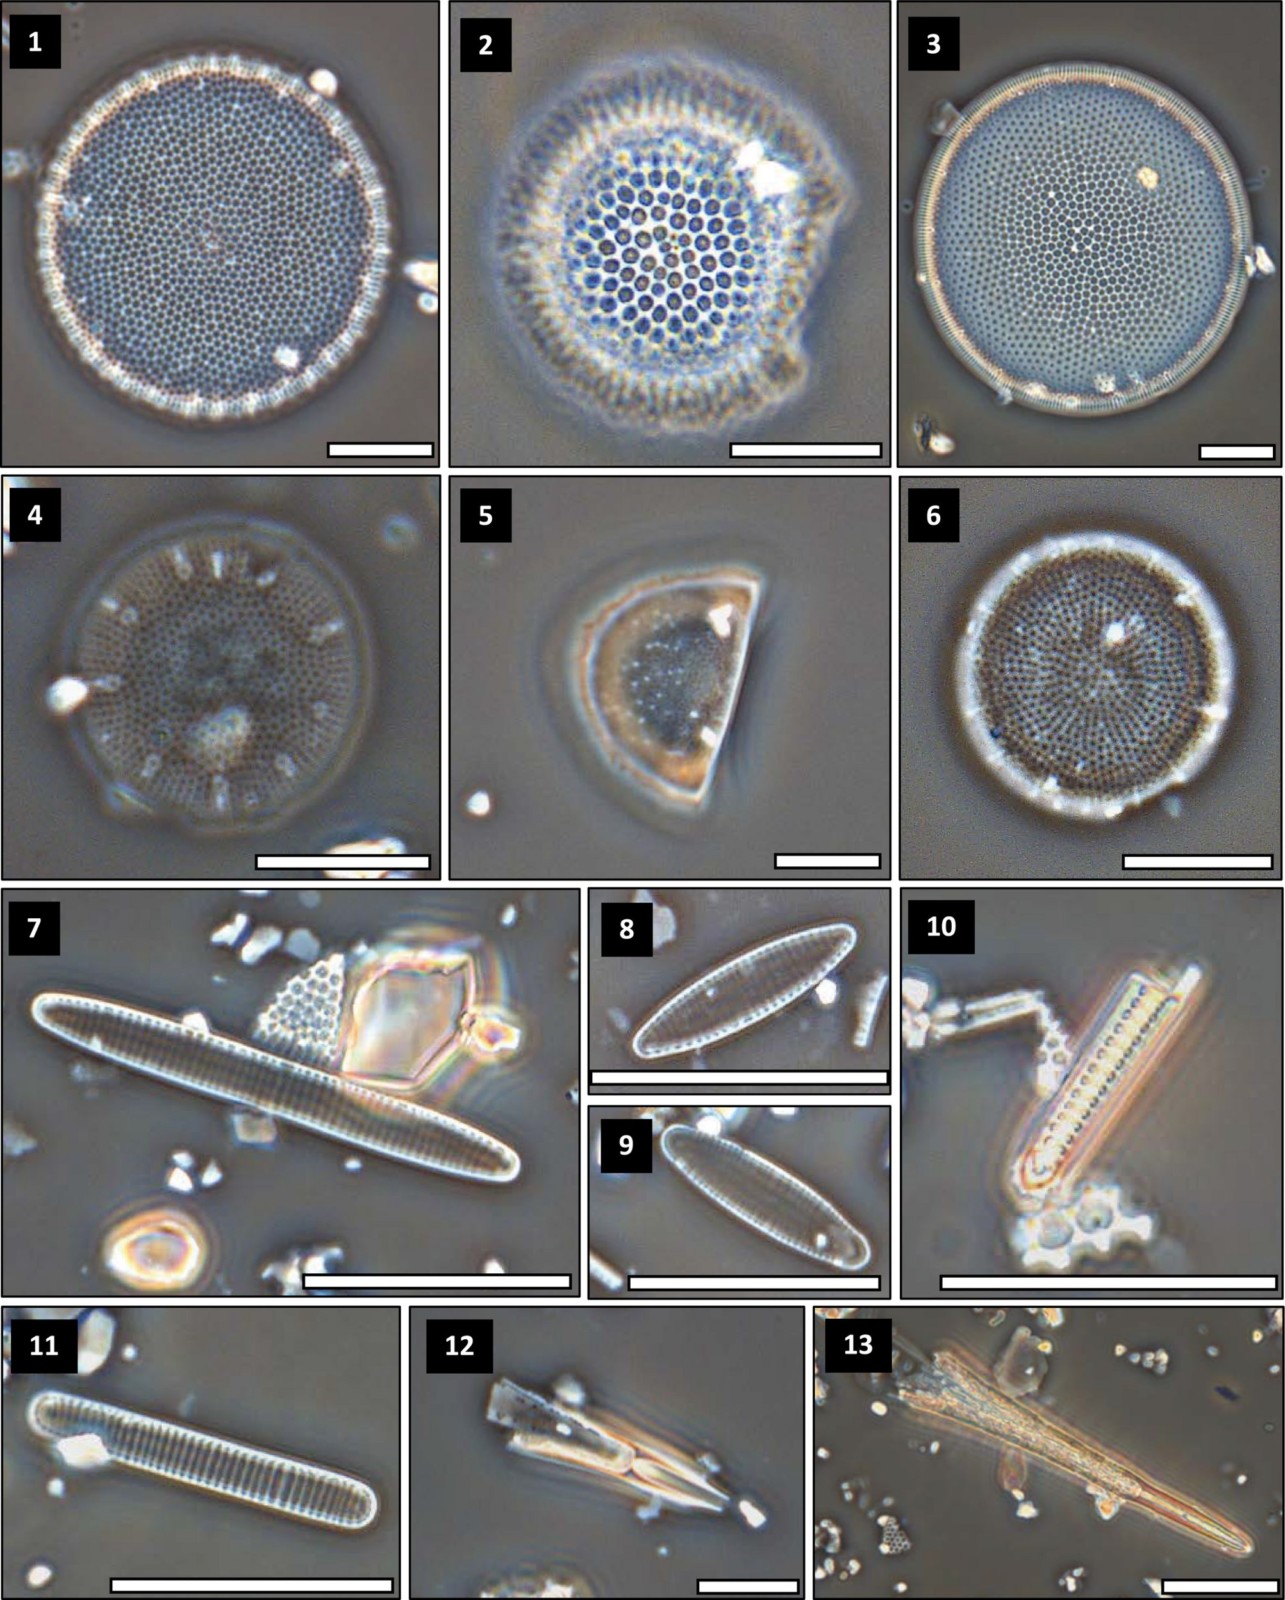 Microscopic photographs of different phytoplankton species.